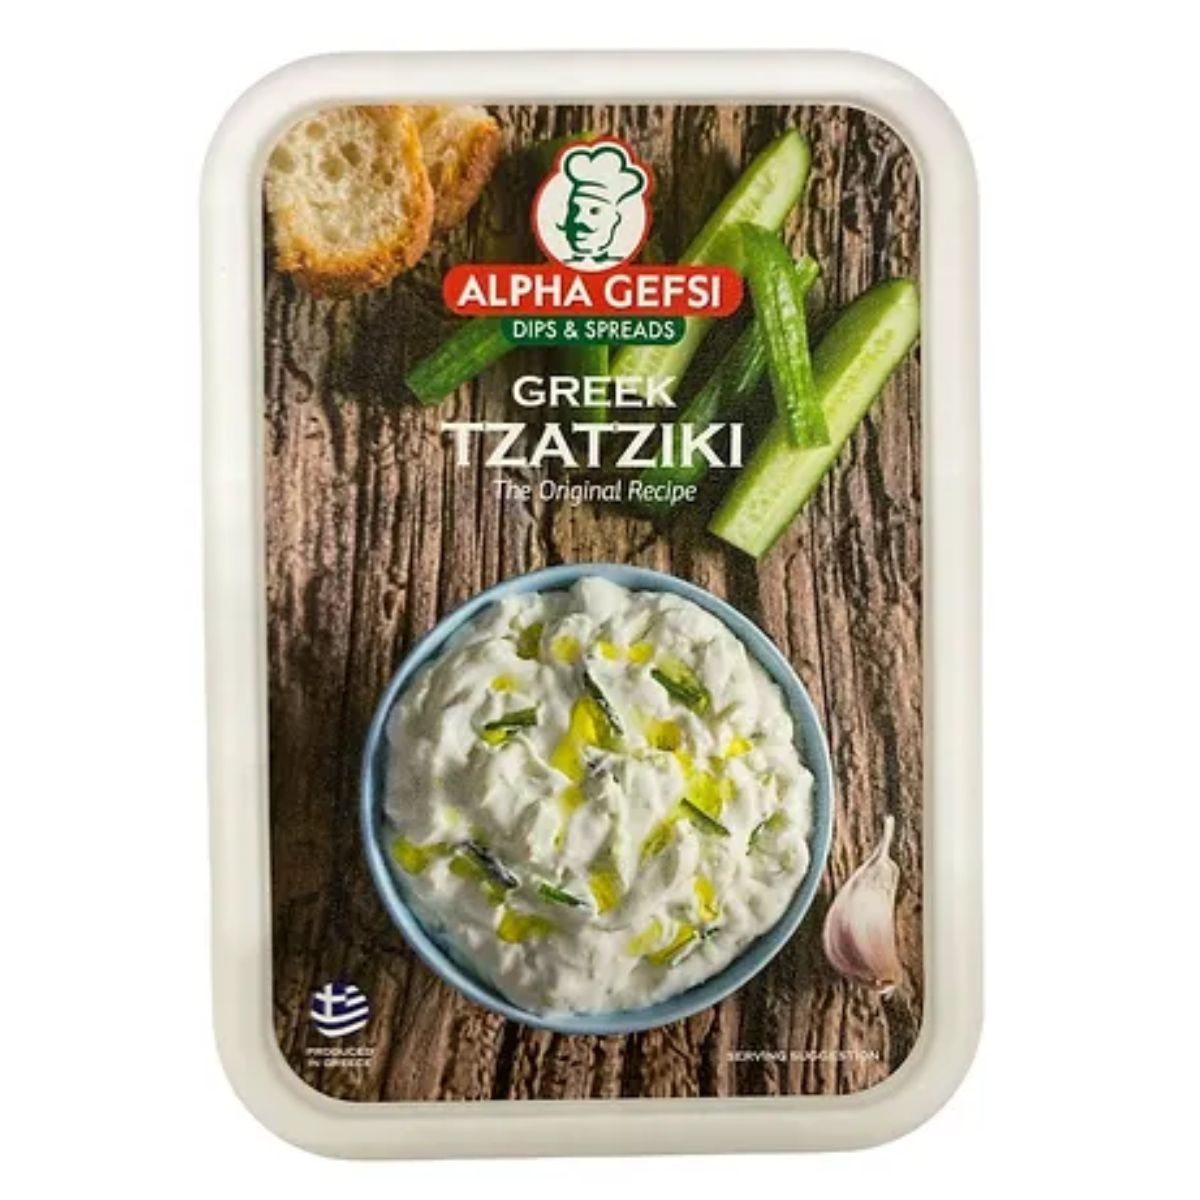 Packaged Alpha Gefsi - Tzatziki Dip - 200g in a bowl with cucumber slices, garlic, and a piece of bread on a wooden background, labeled "alpha gefsi dips & spreads.